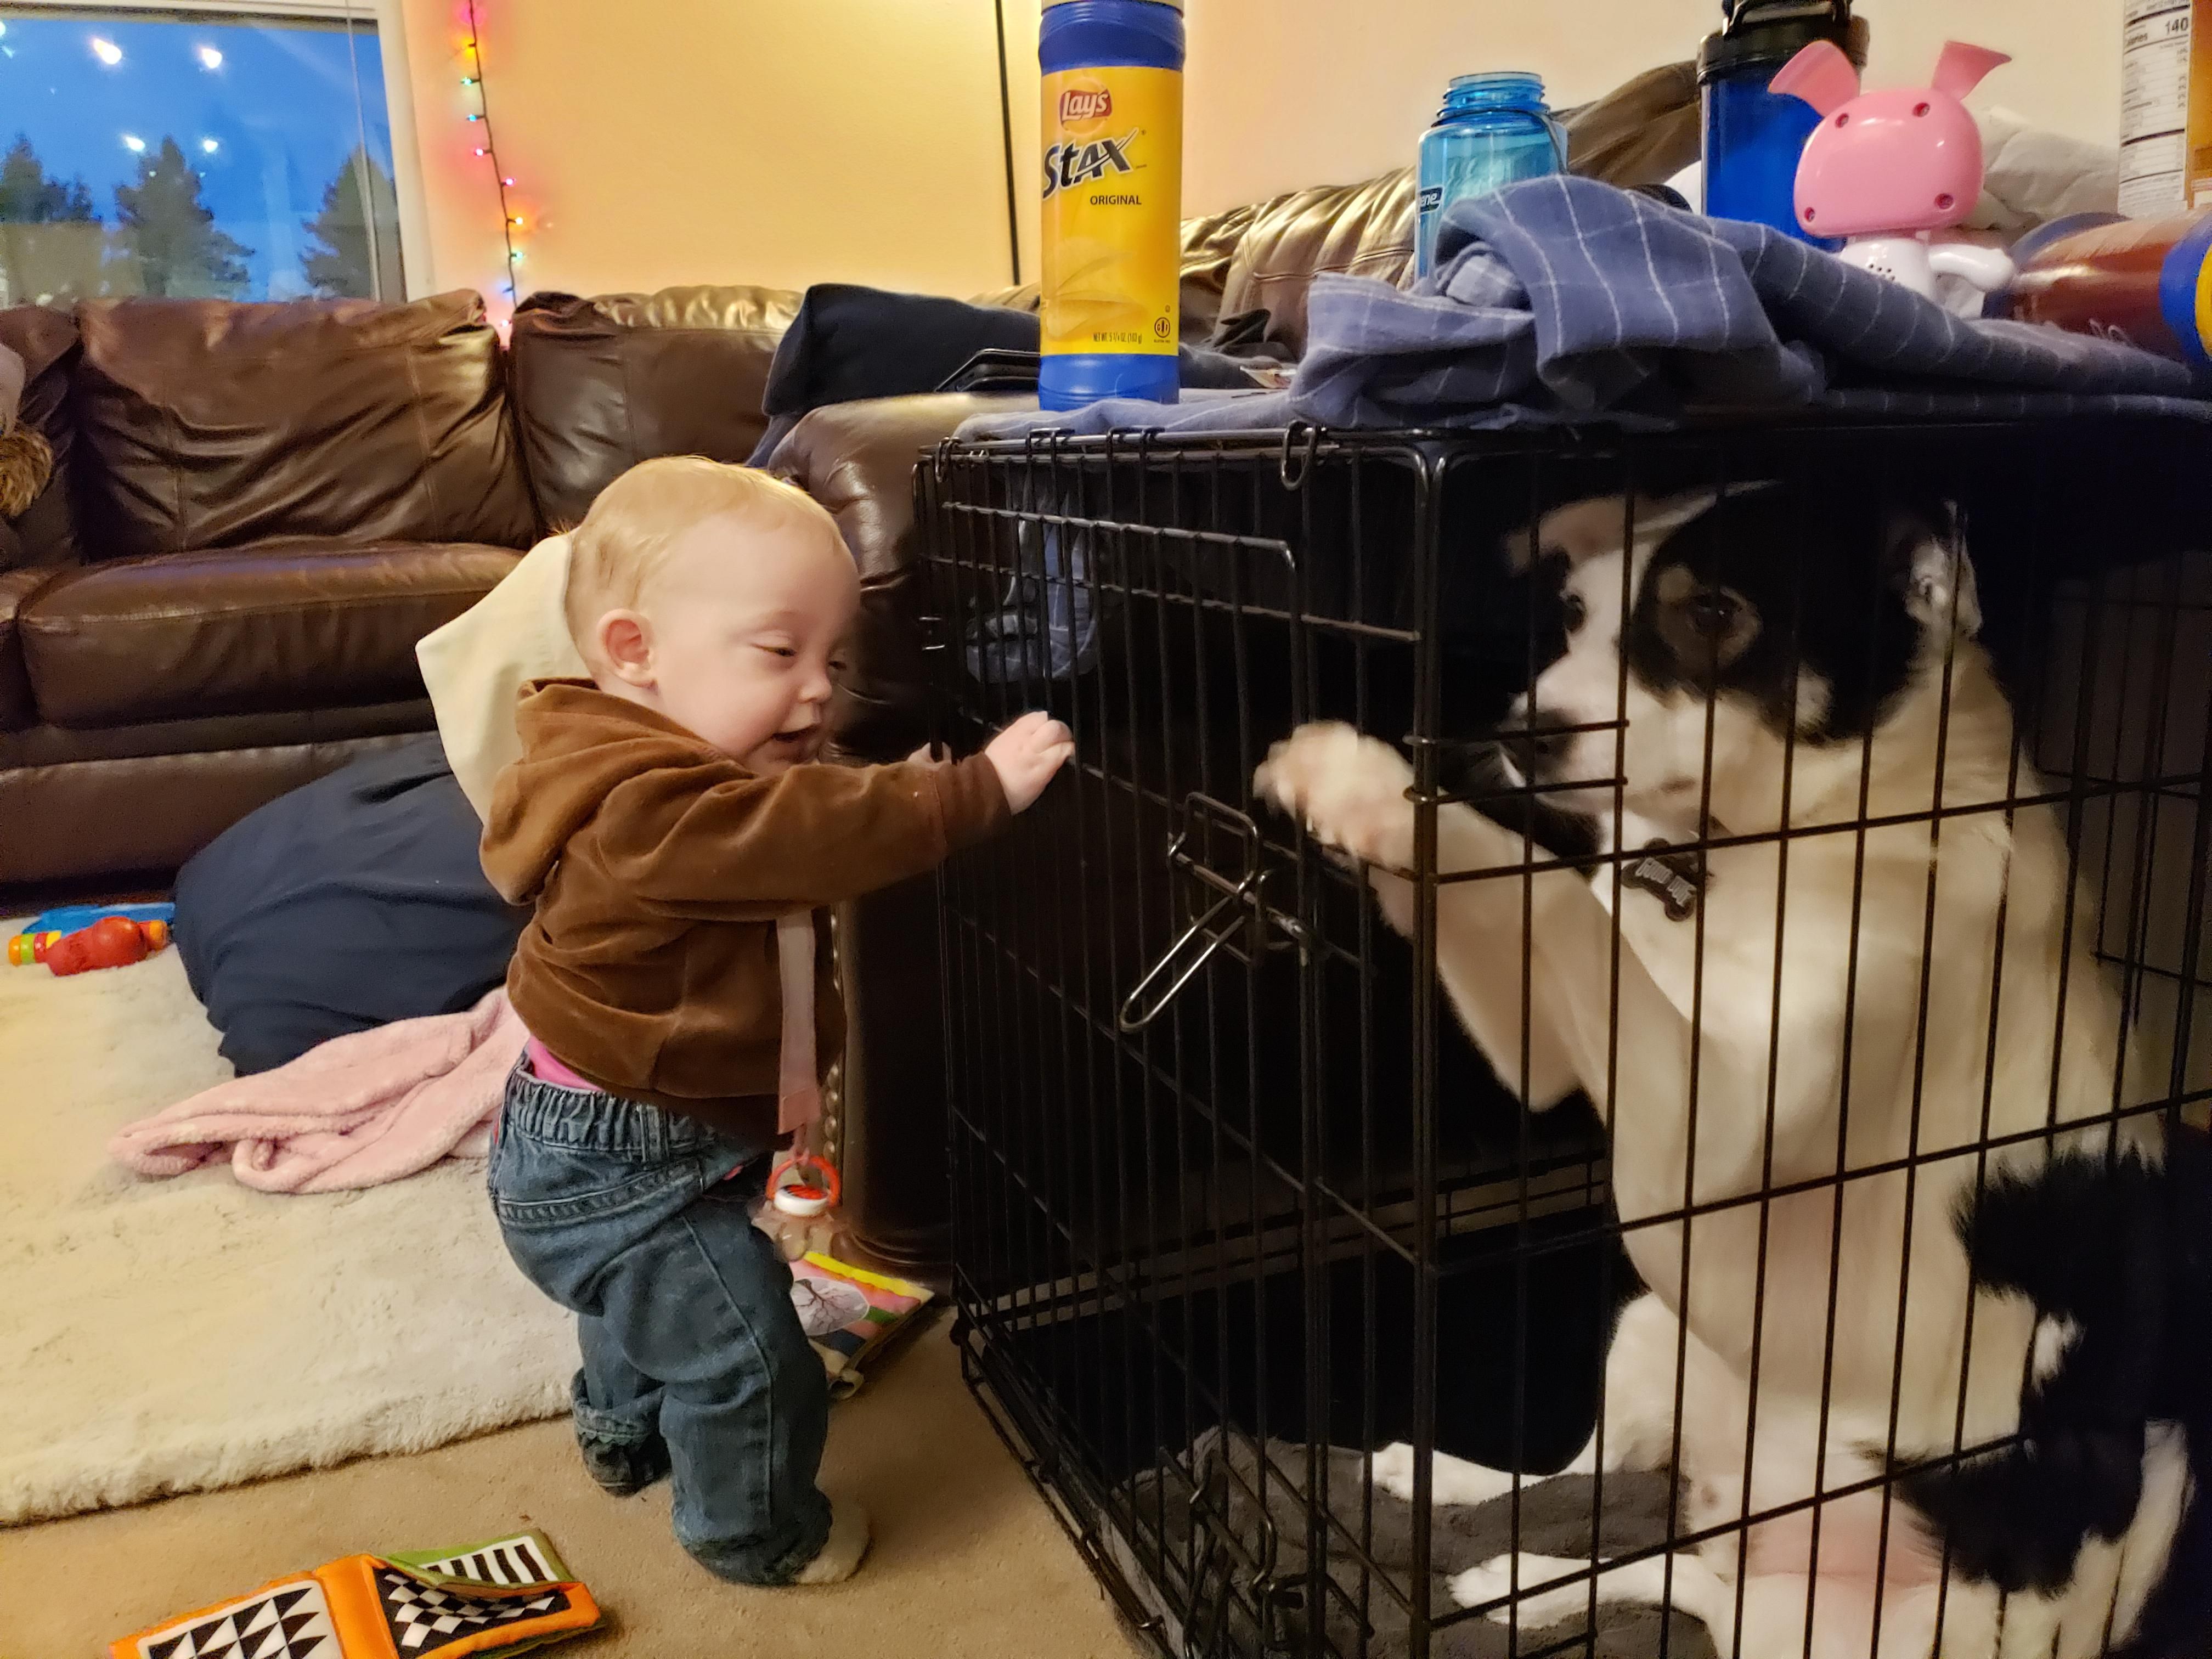 Caught the suspect trying to break the prisoner out of his cell...